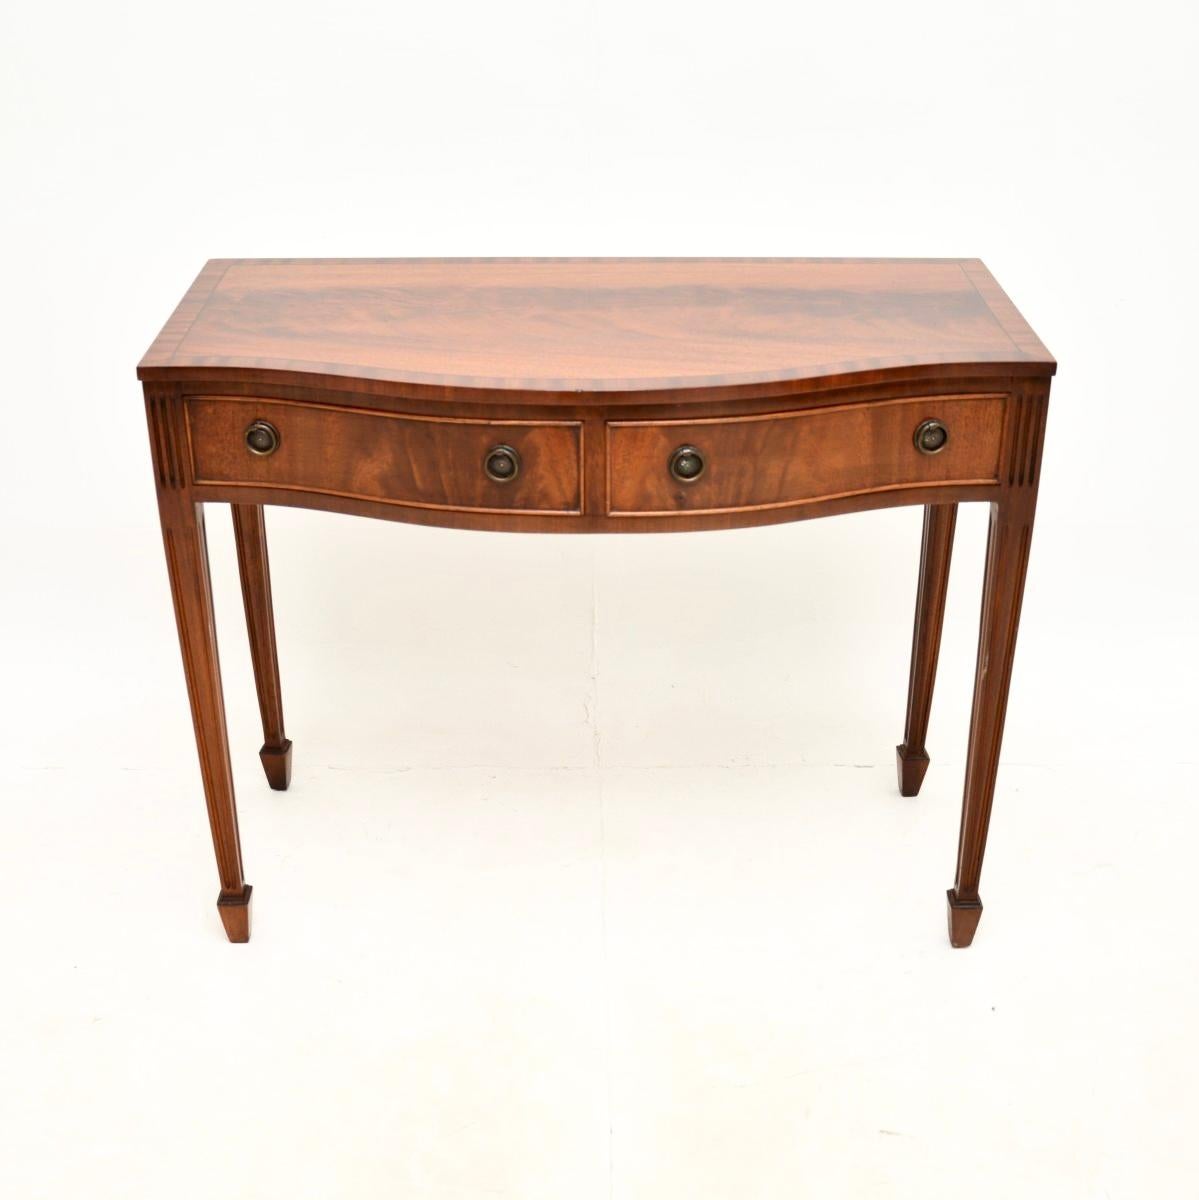 A lovely antique Georgian style console table. This was made in England, it dates from around the 1950’s.

The quality is fantastic, this has a serpentine shaped front with tapered legs terminating in spade feet. The drawers are felt lined and have